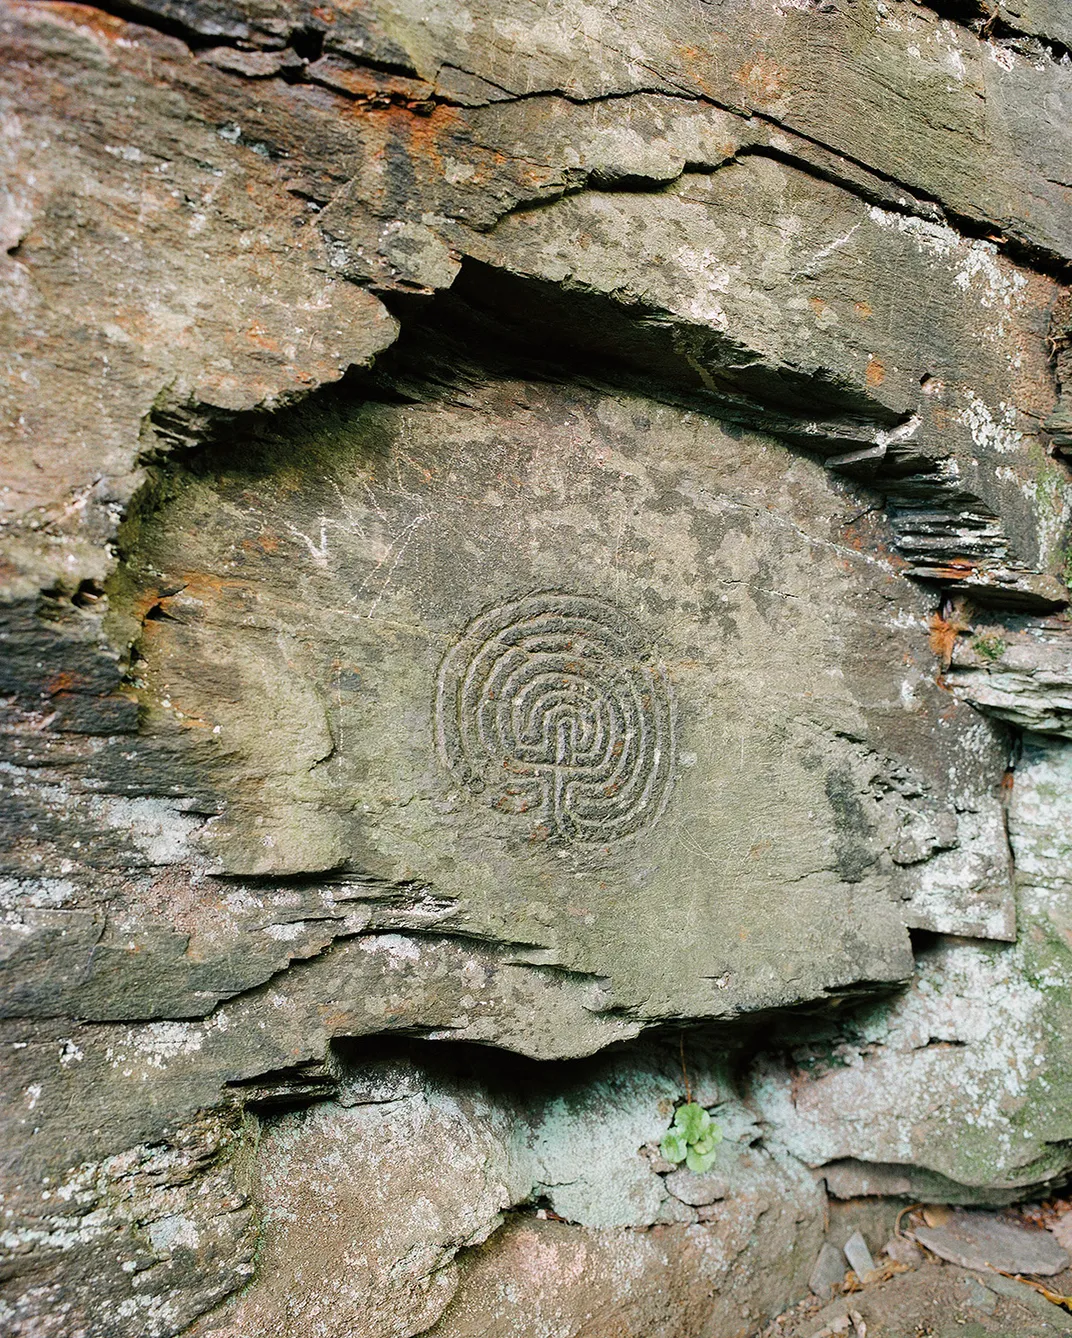 A cryptic labyrinth carving